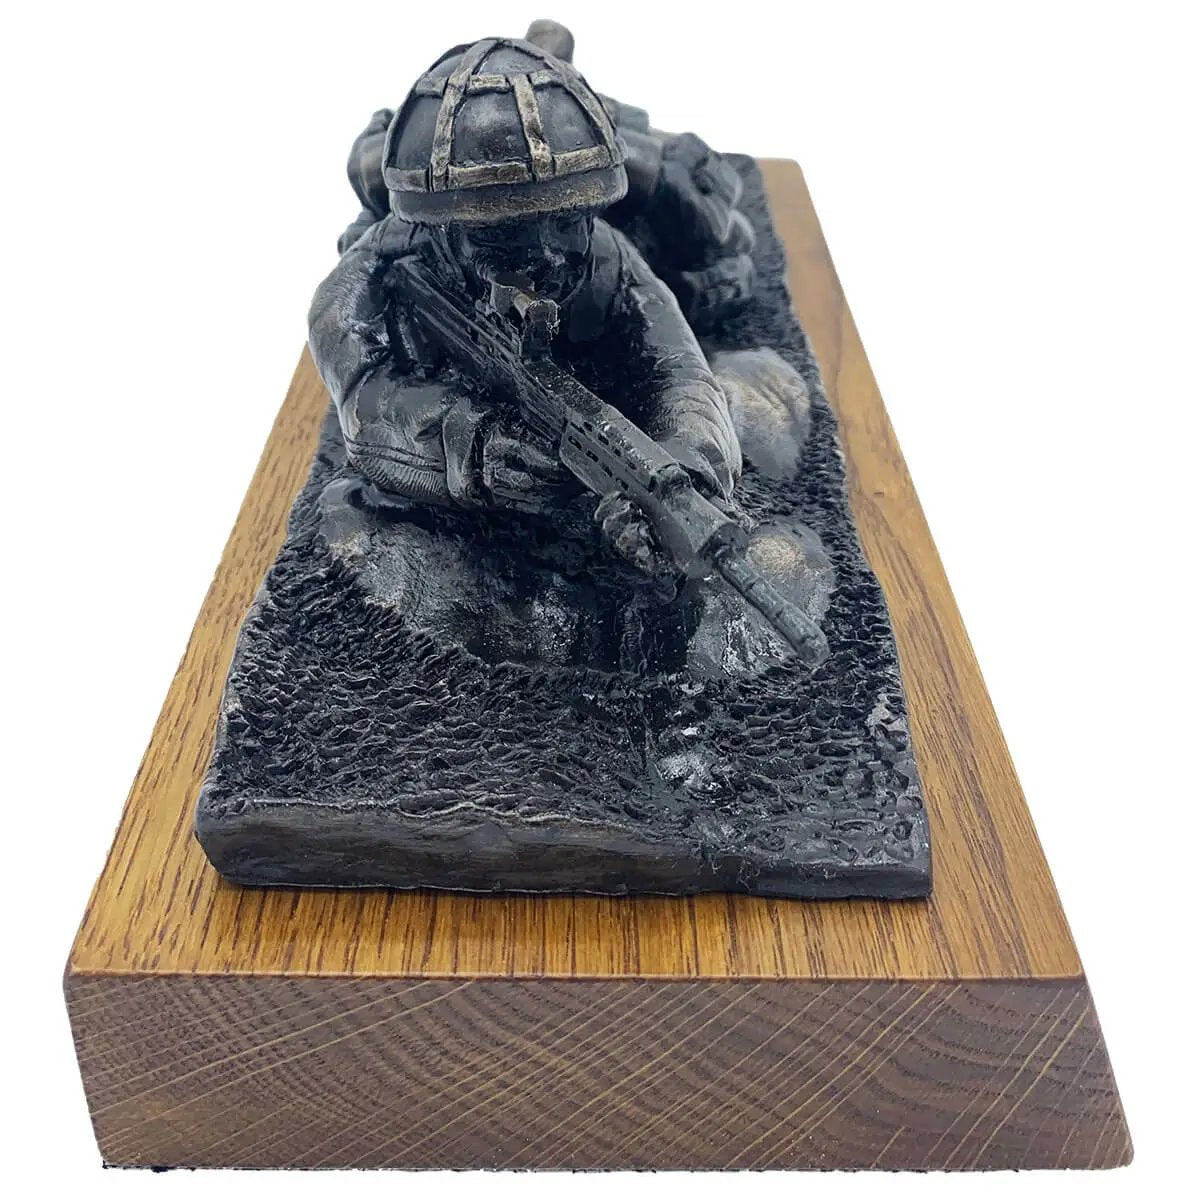 Prone Soldier with SA80 Bronze Resin Statue - John Bull Clothing